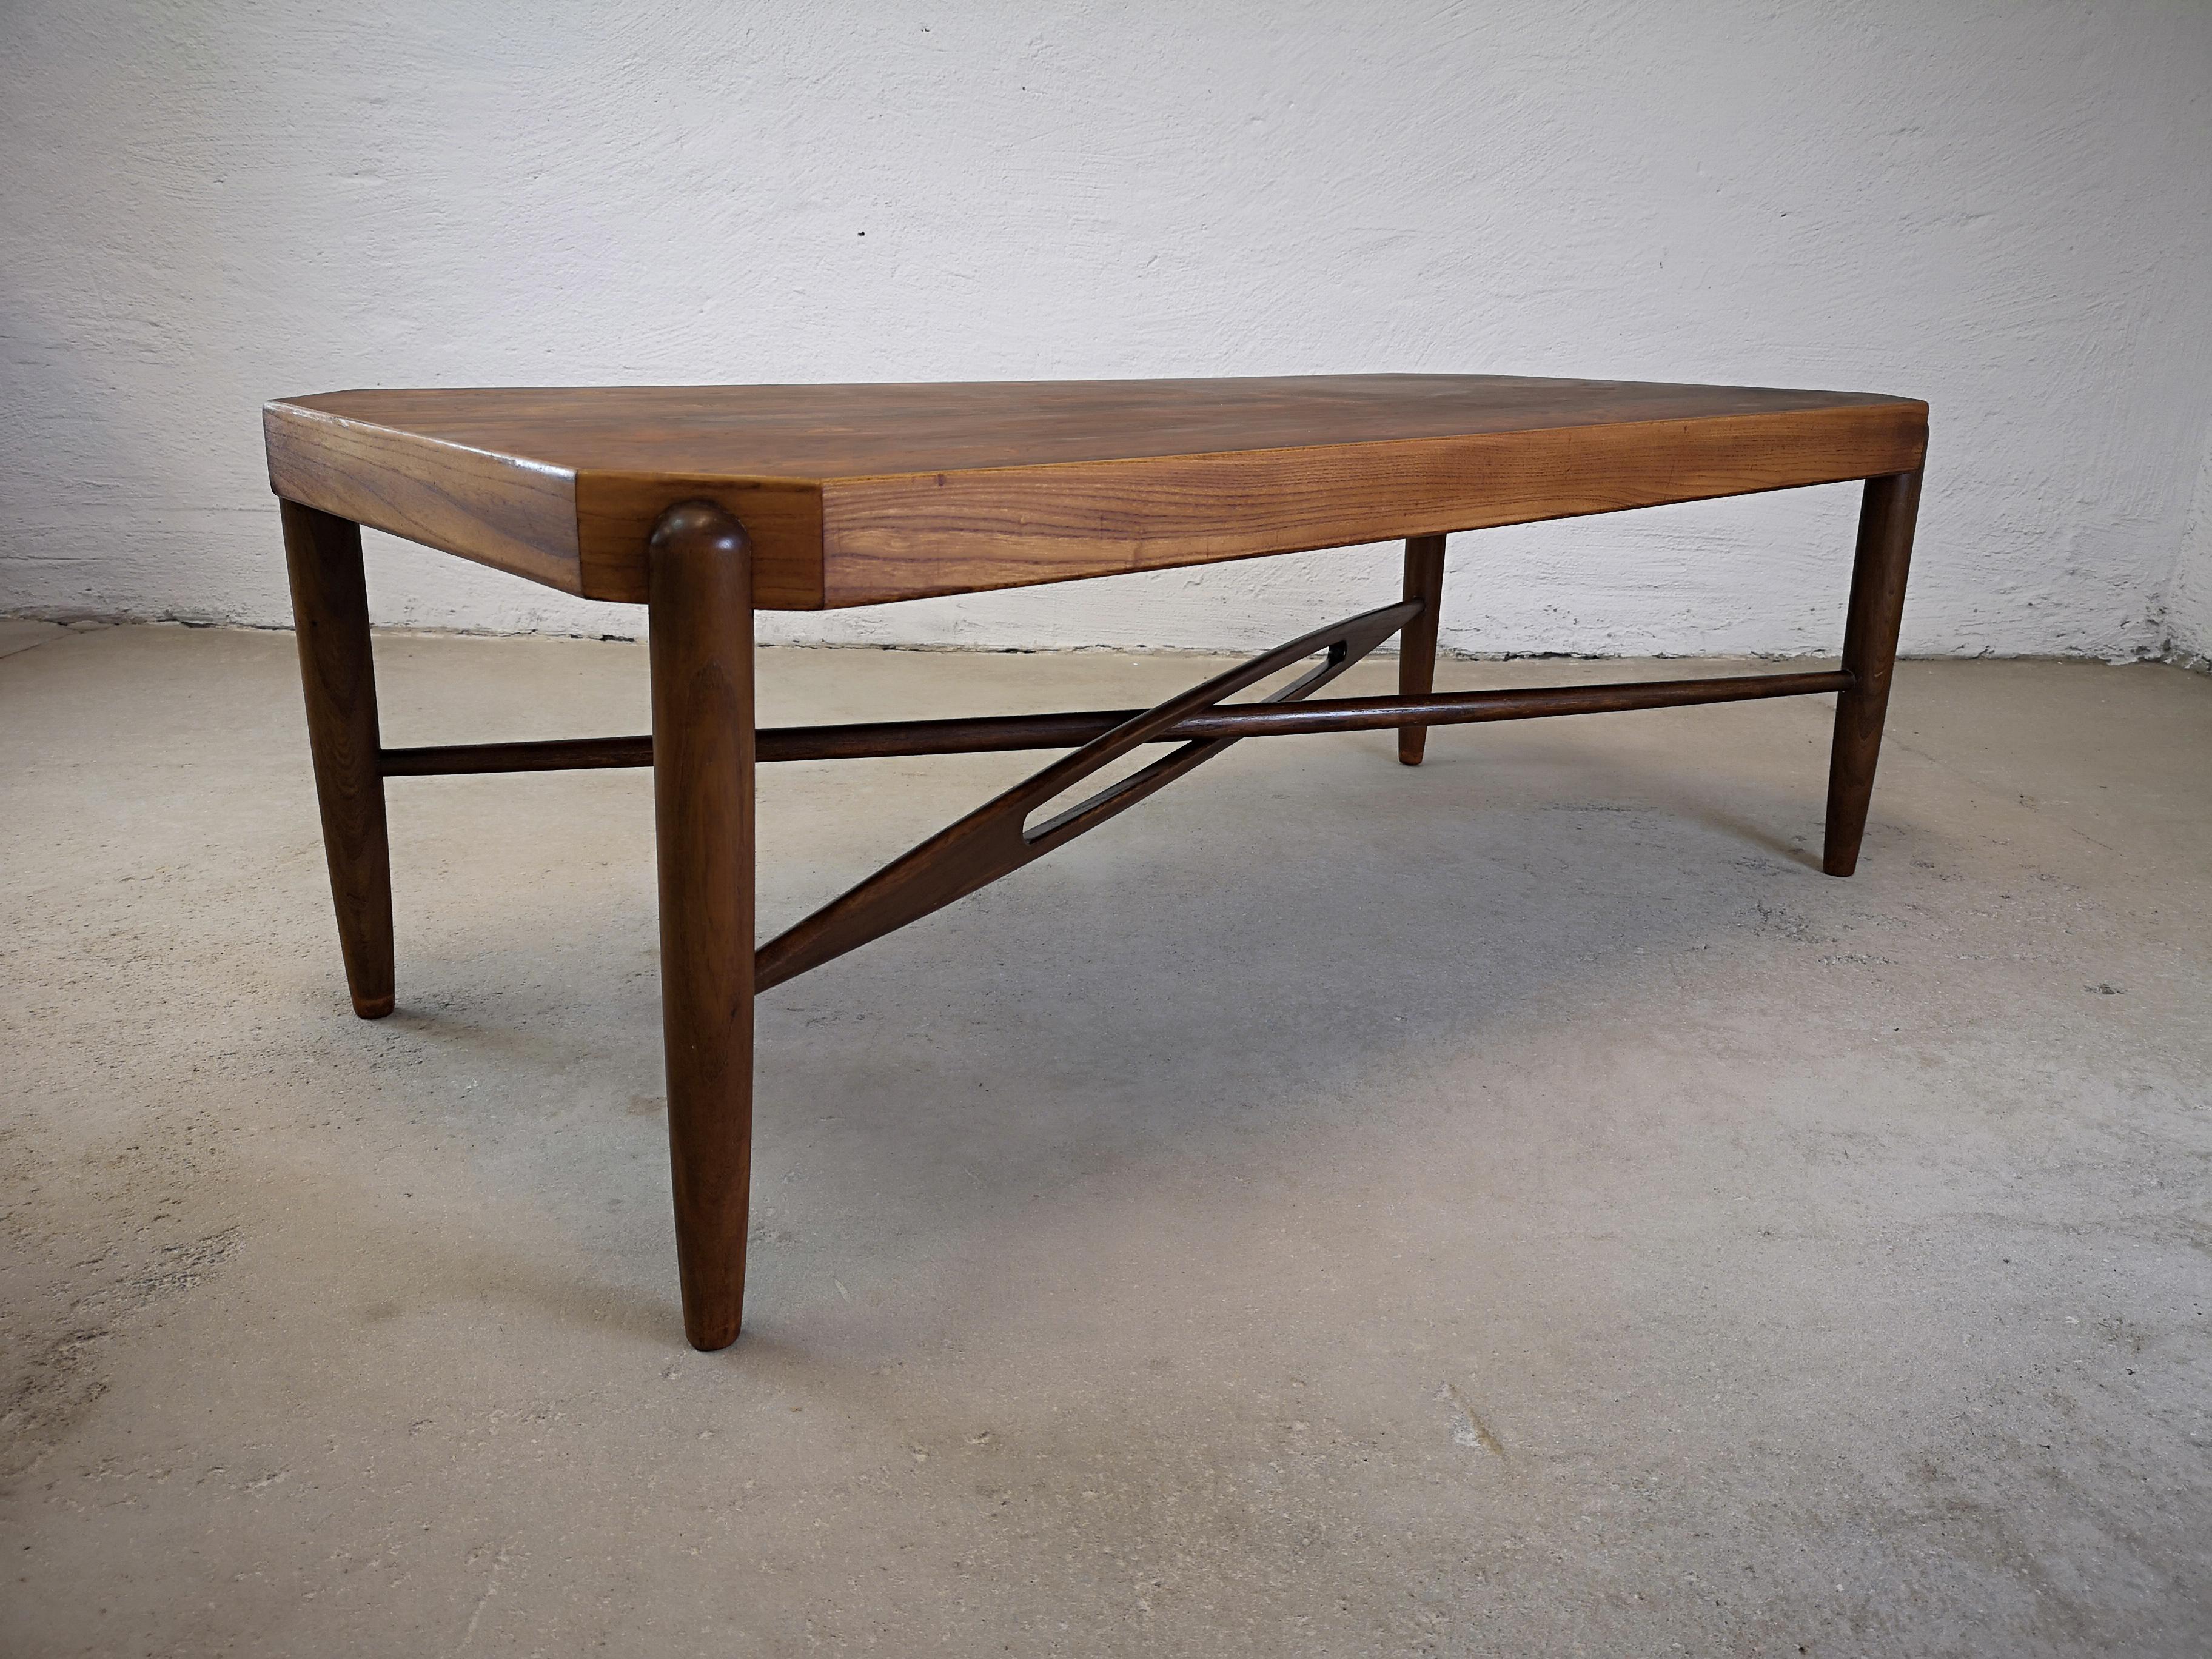 Jason Ringsted Danish Applied Art Coffee Table (Mitte des 20. Jahrhunderts)